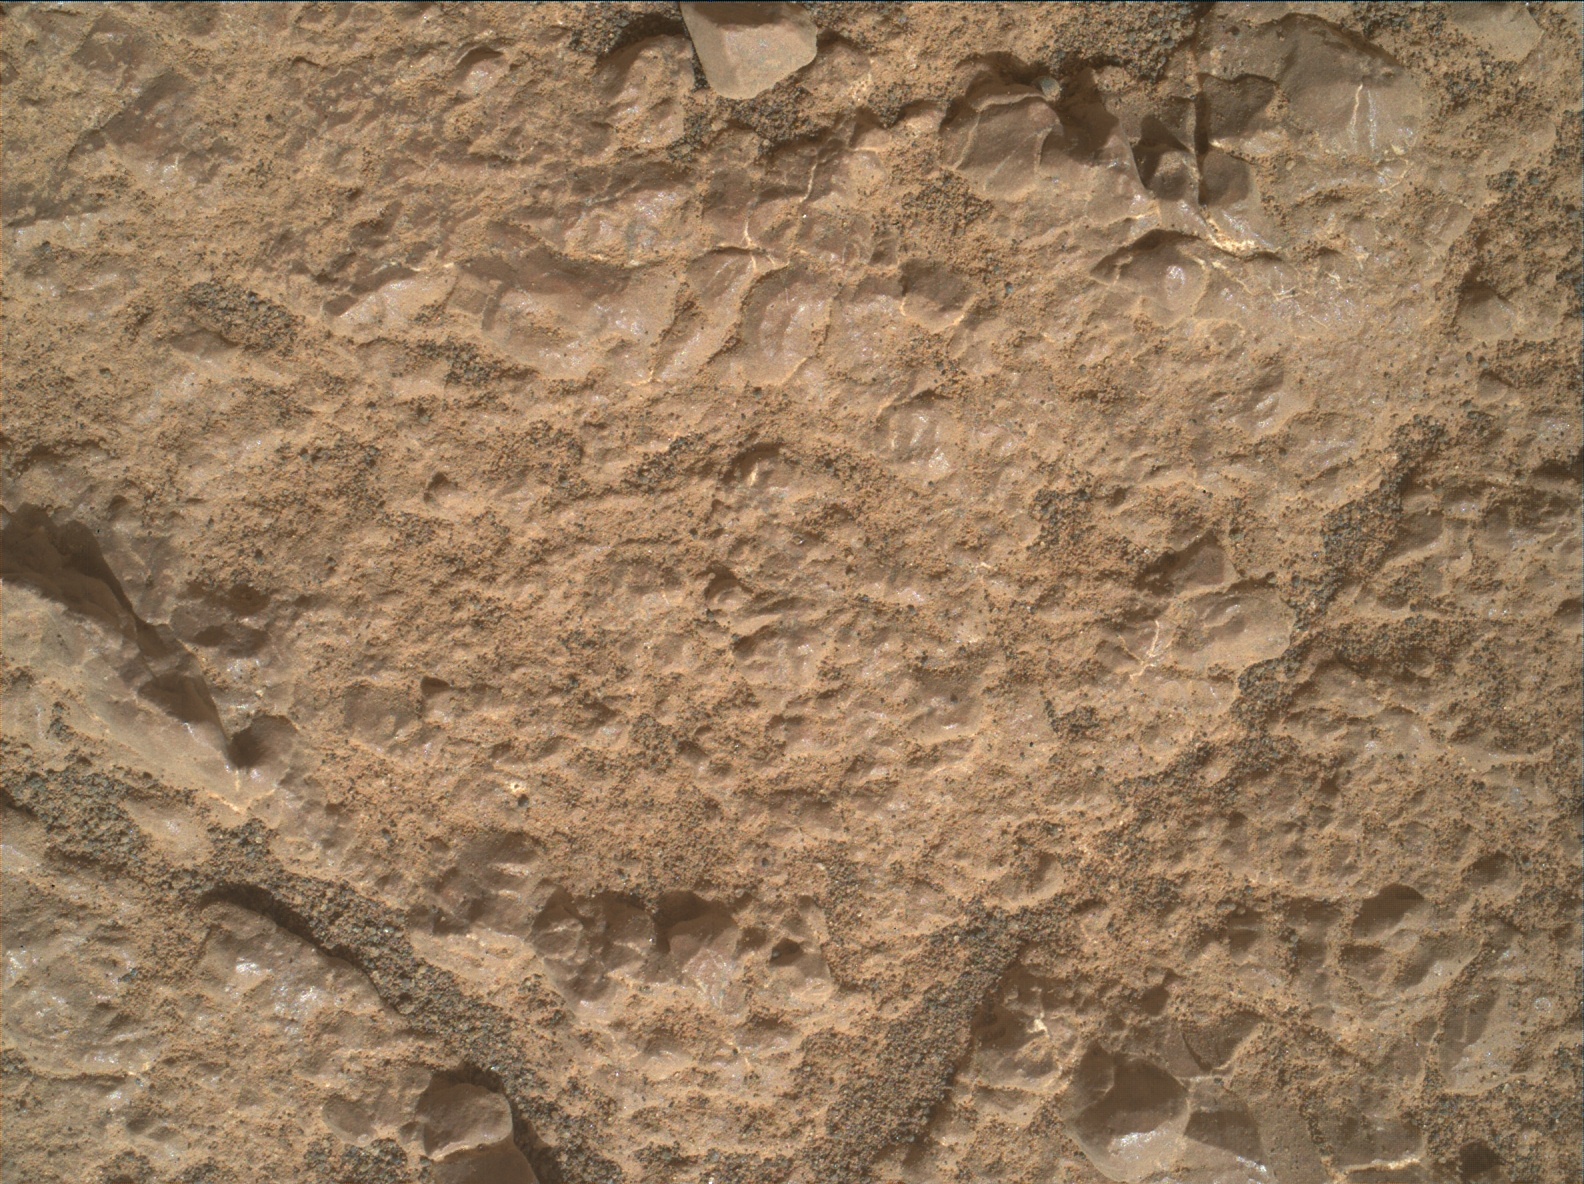 Nasa's Mars rover Curiosity acquired this image using its Mars Hand Lens Imager (MAHLI) on Sol 2259